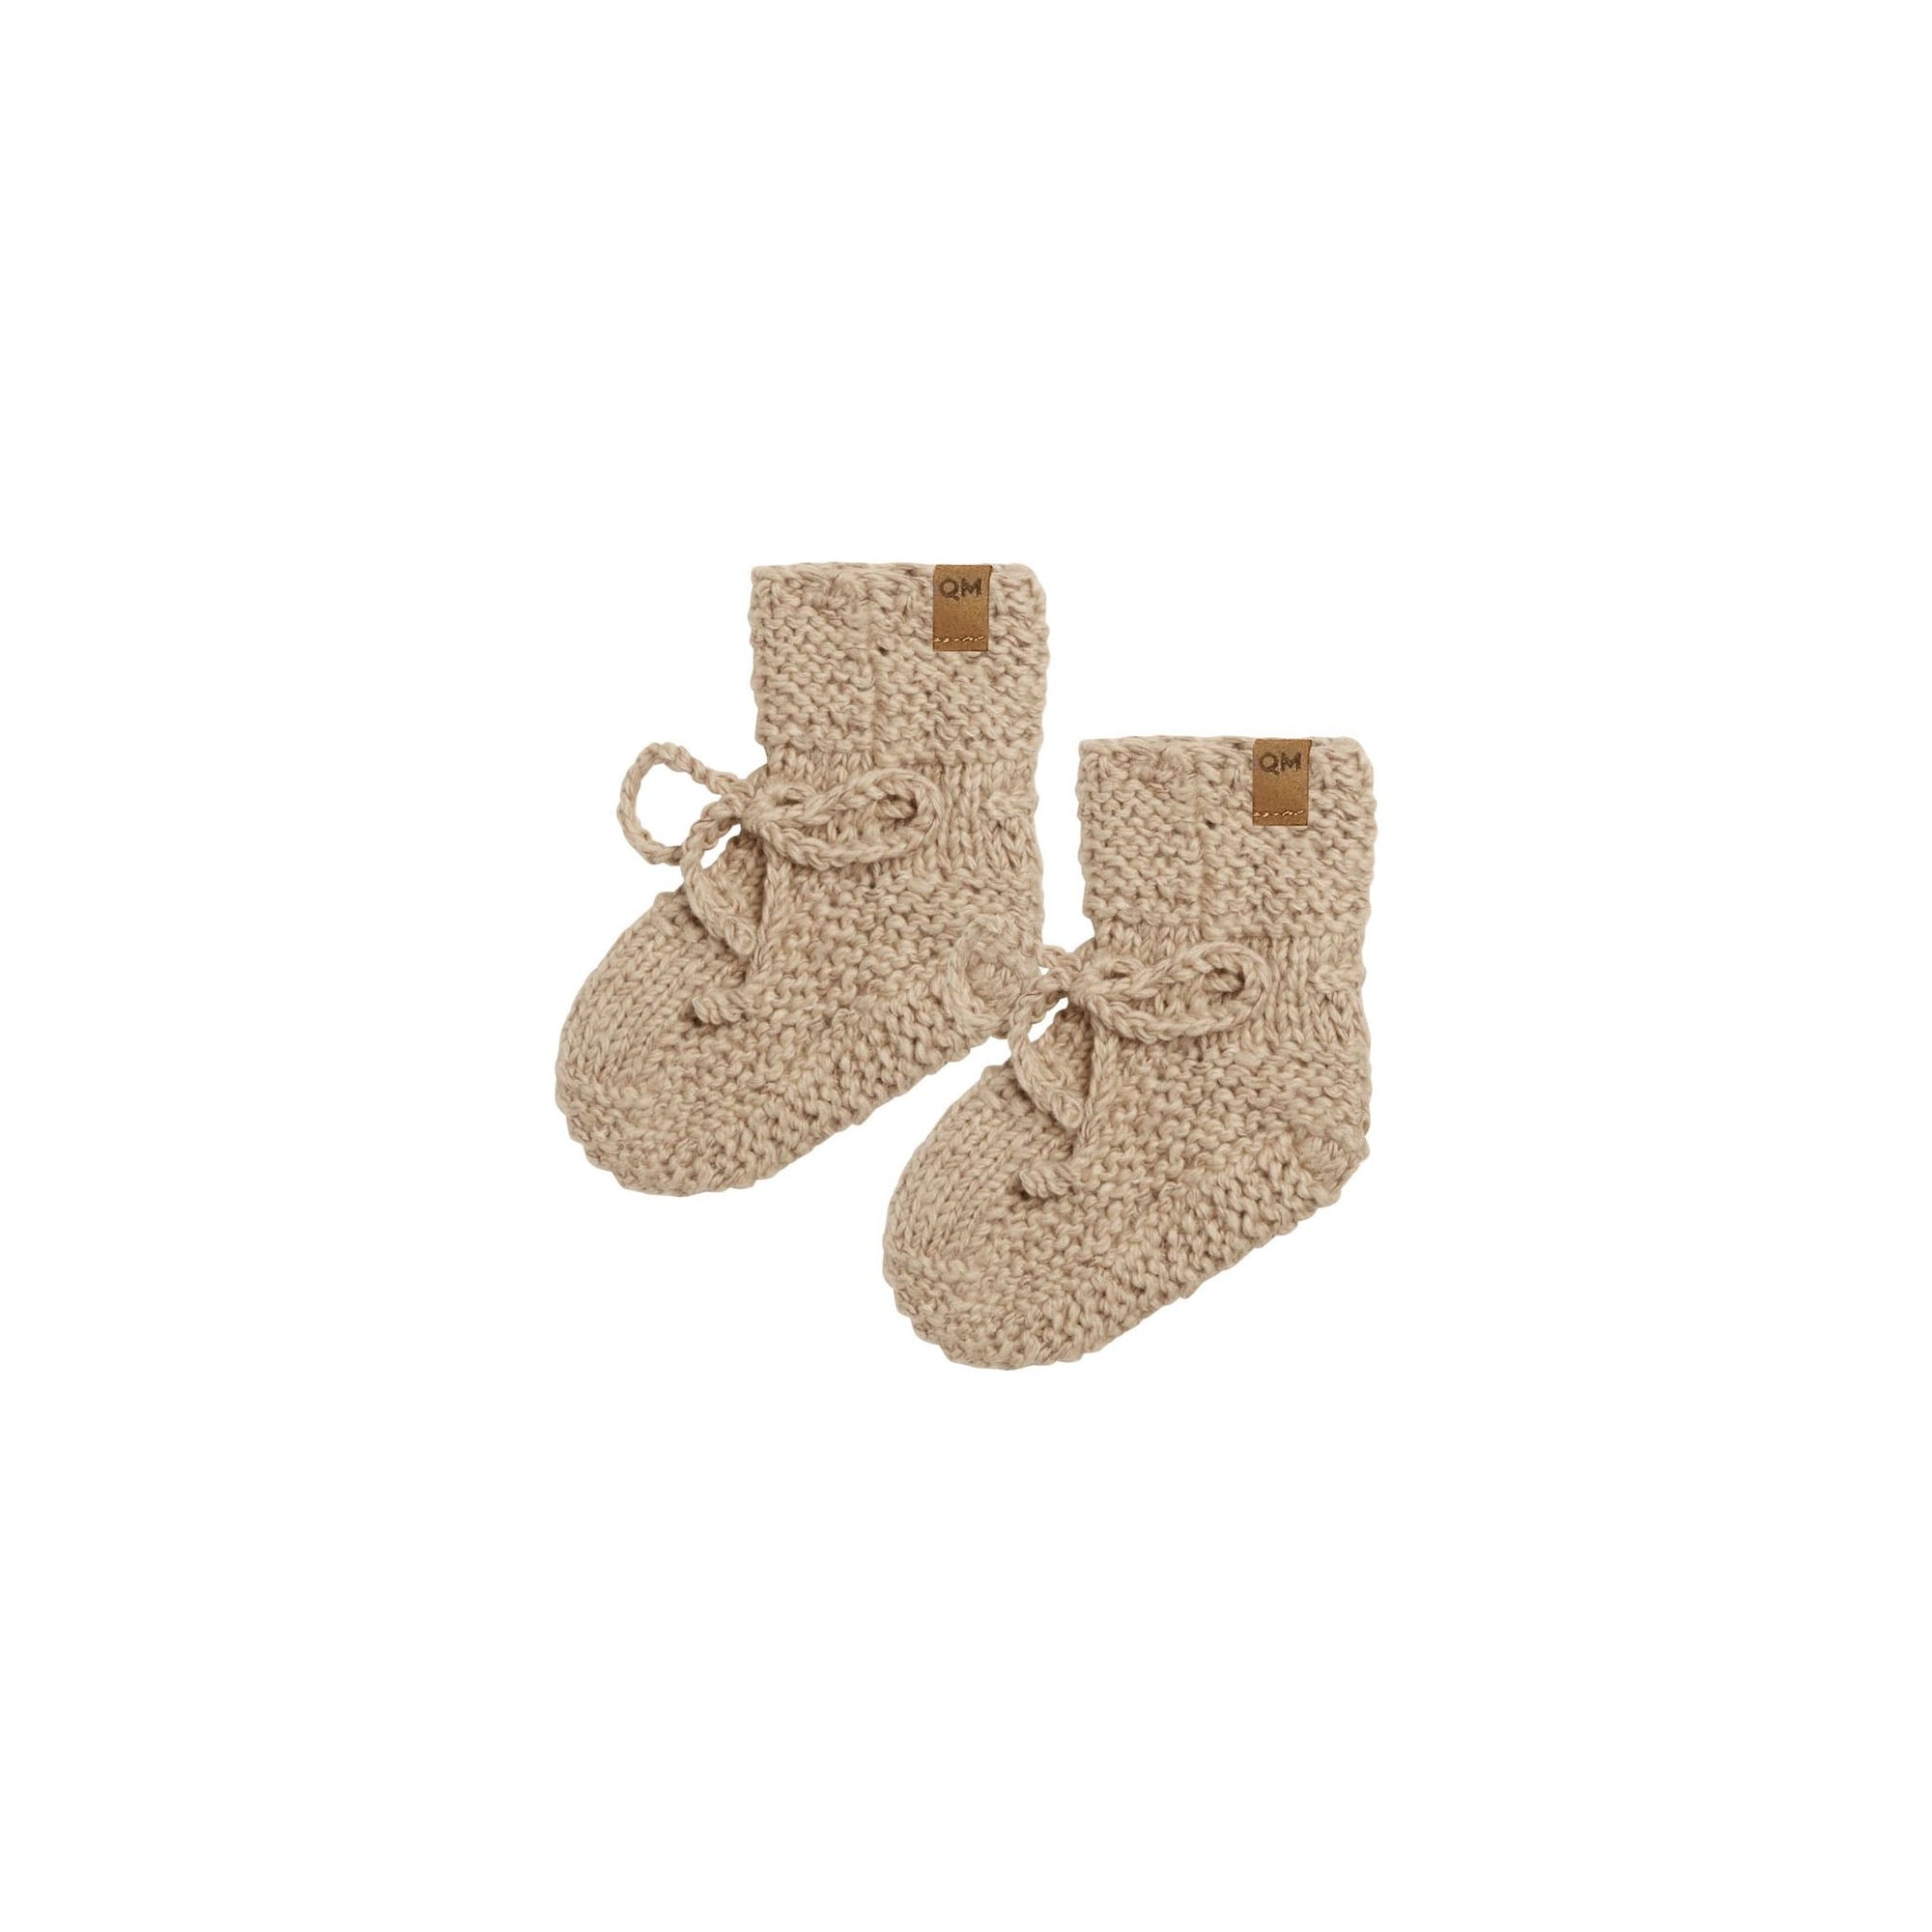 knit booties || latte speckled